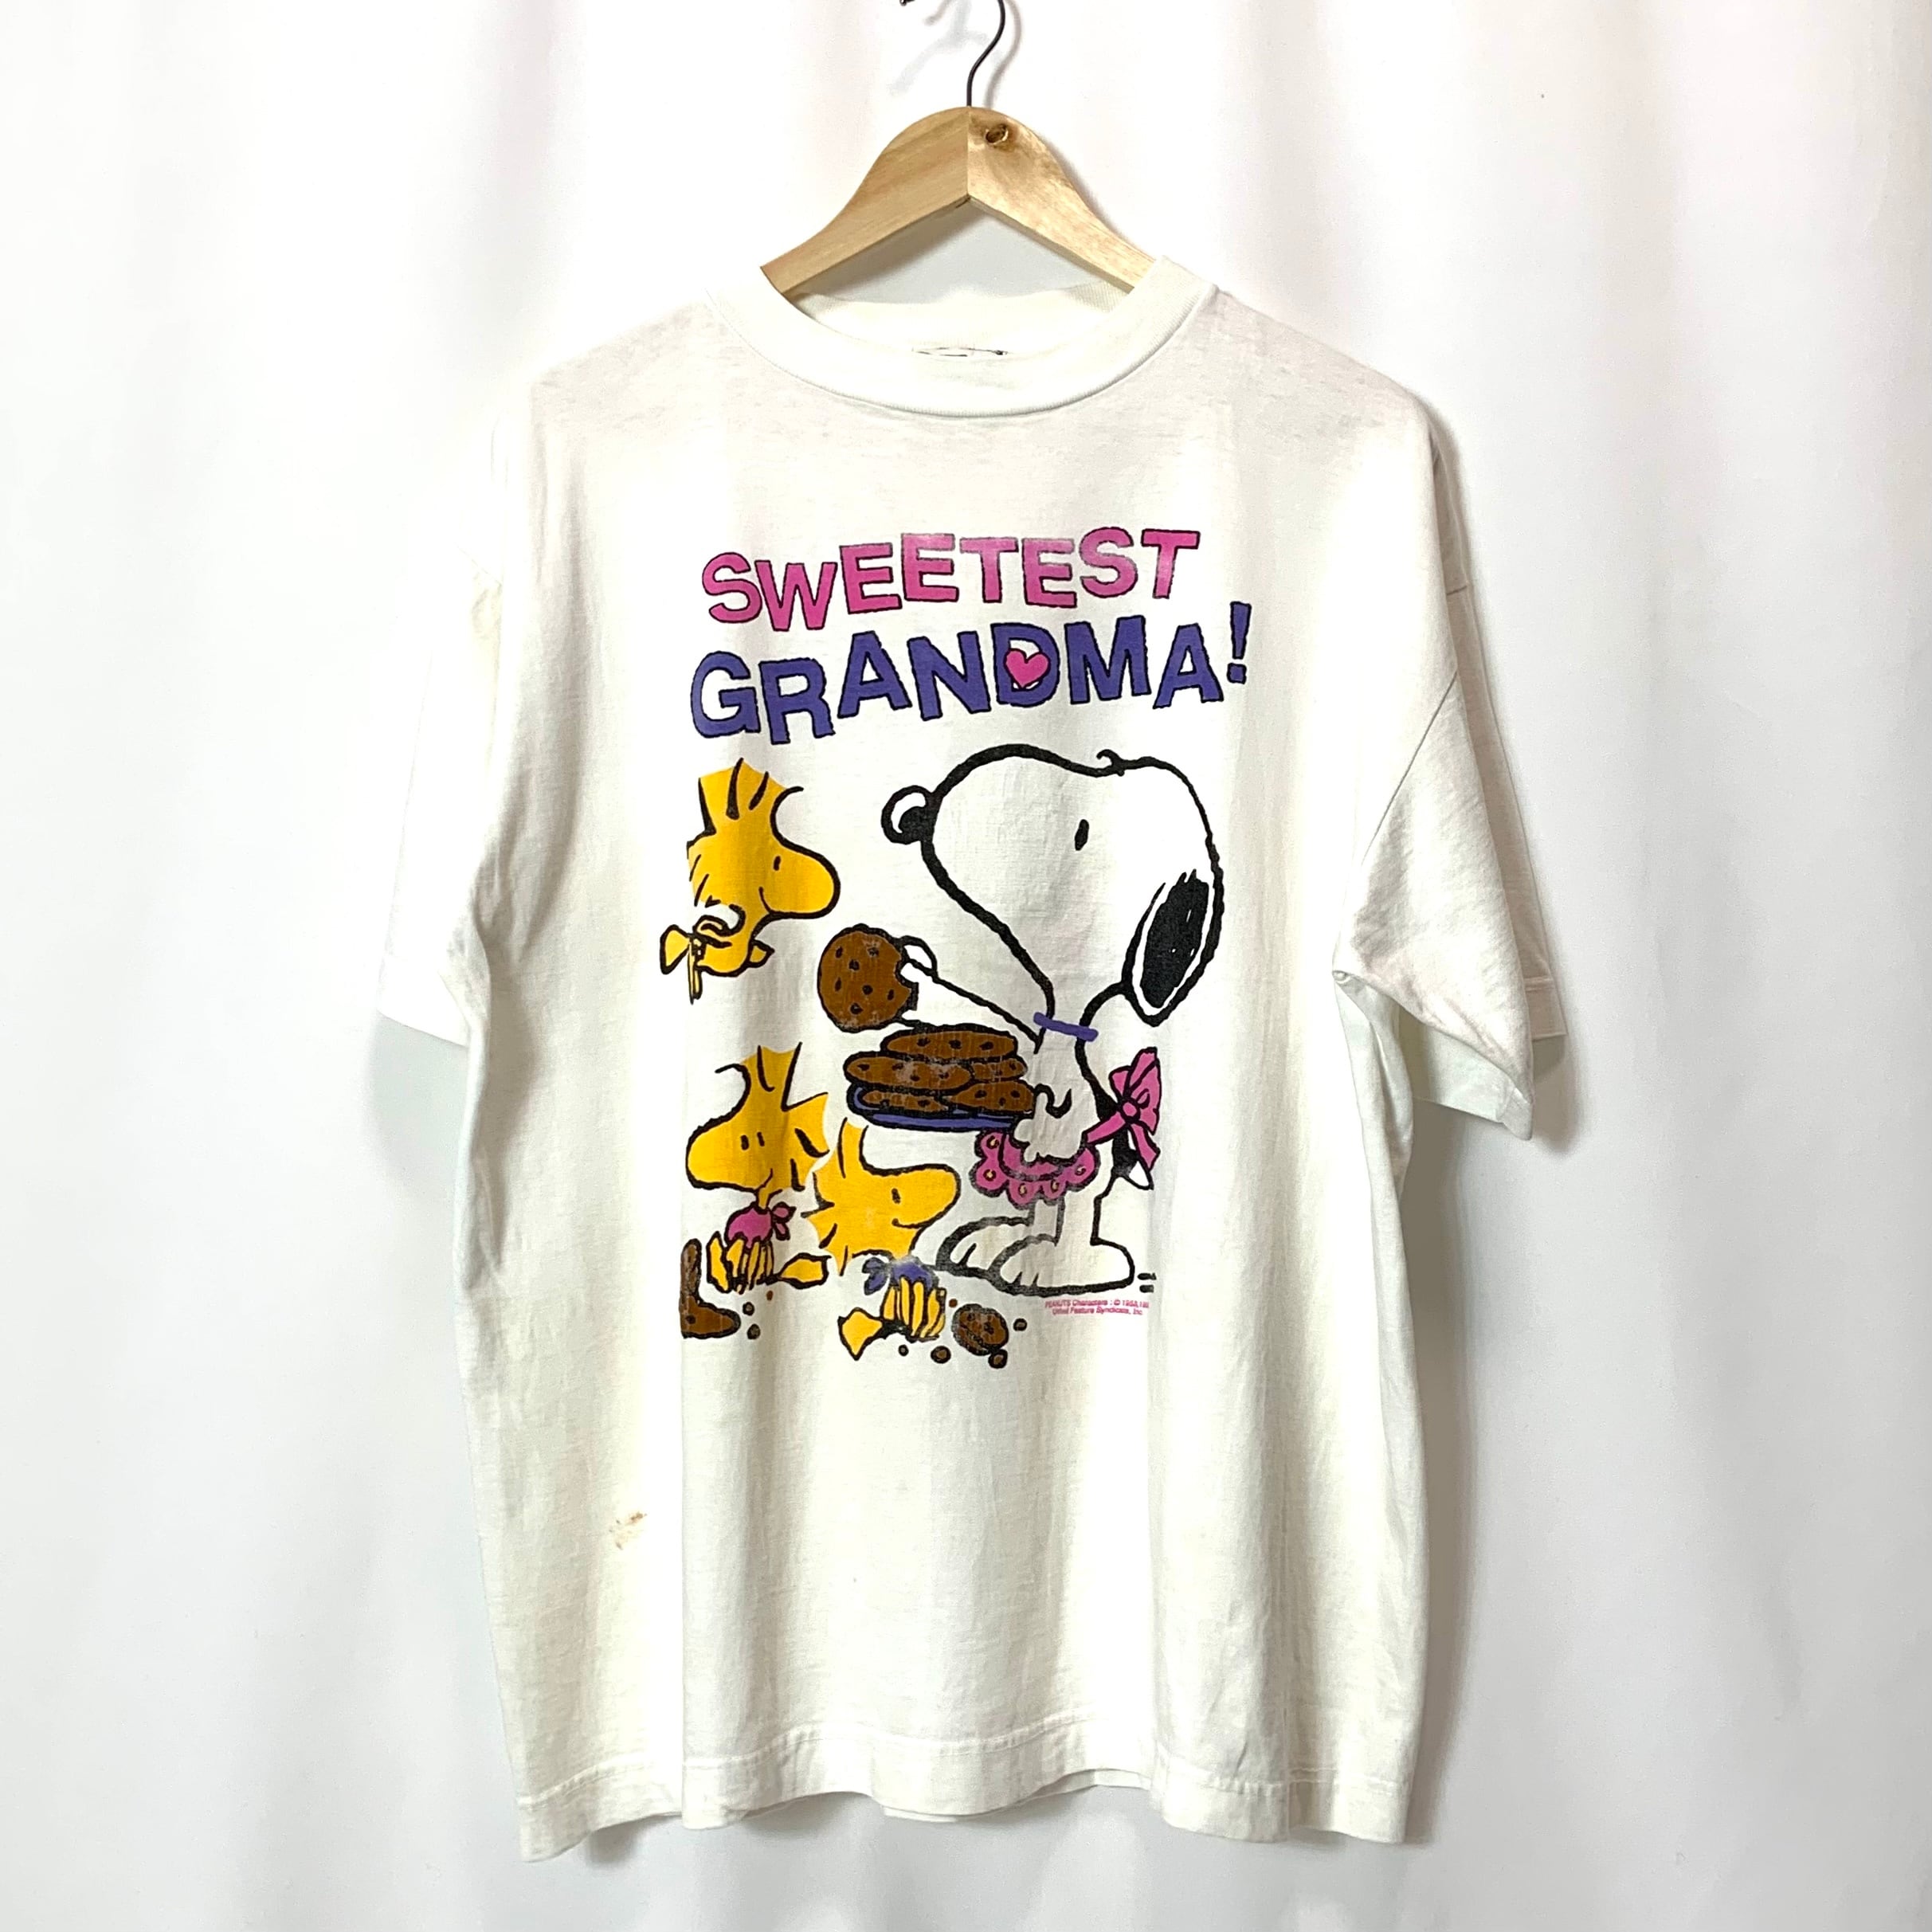 vintage 90s print T-shirt SNOOPY PEANUTS Characters プリントT 